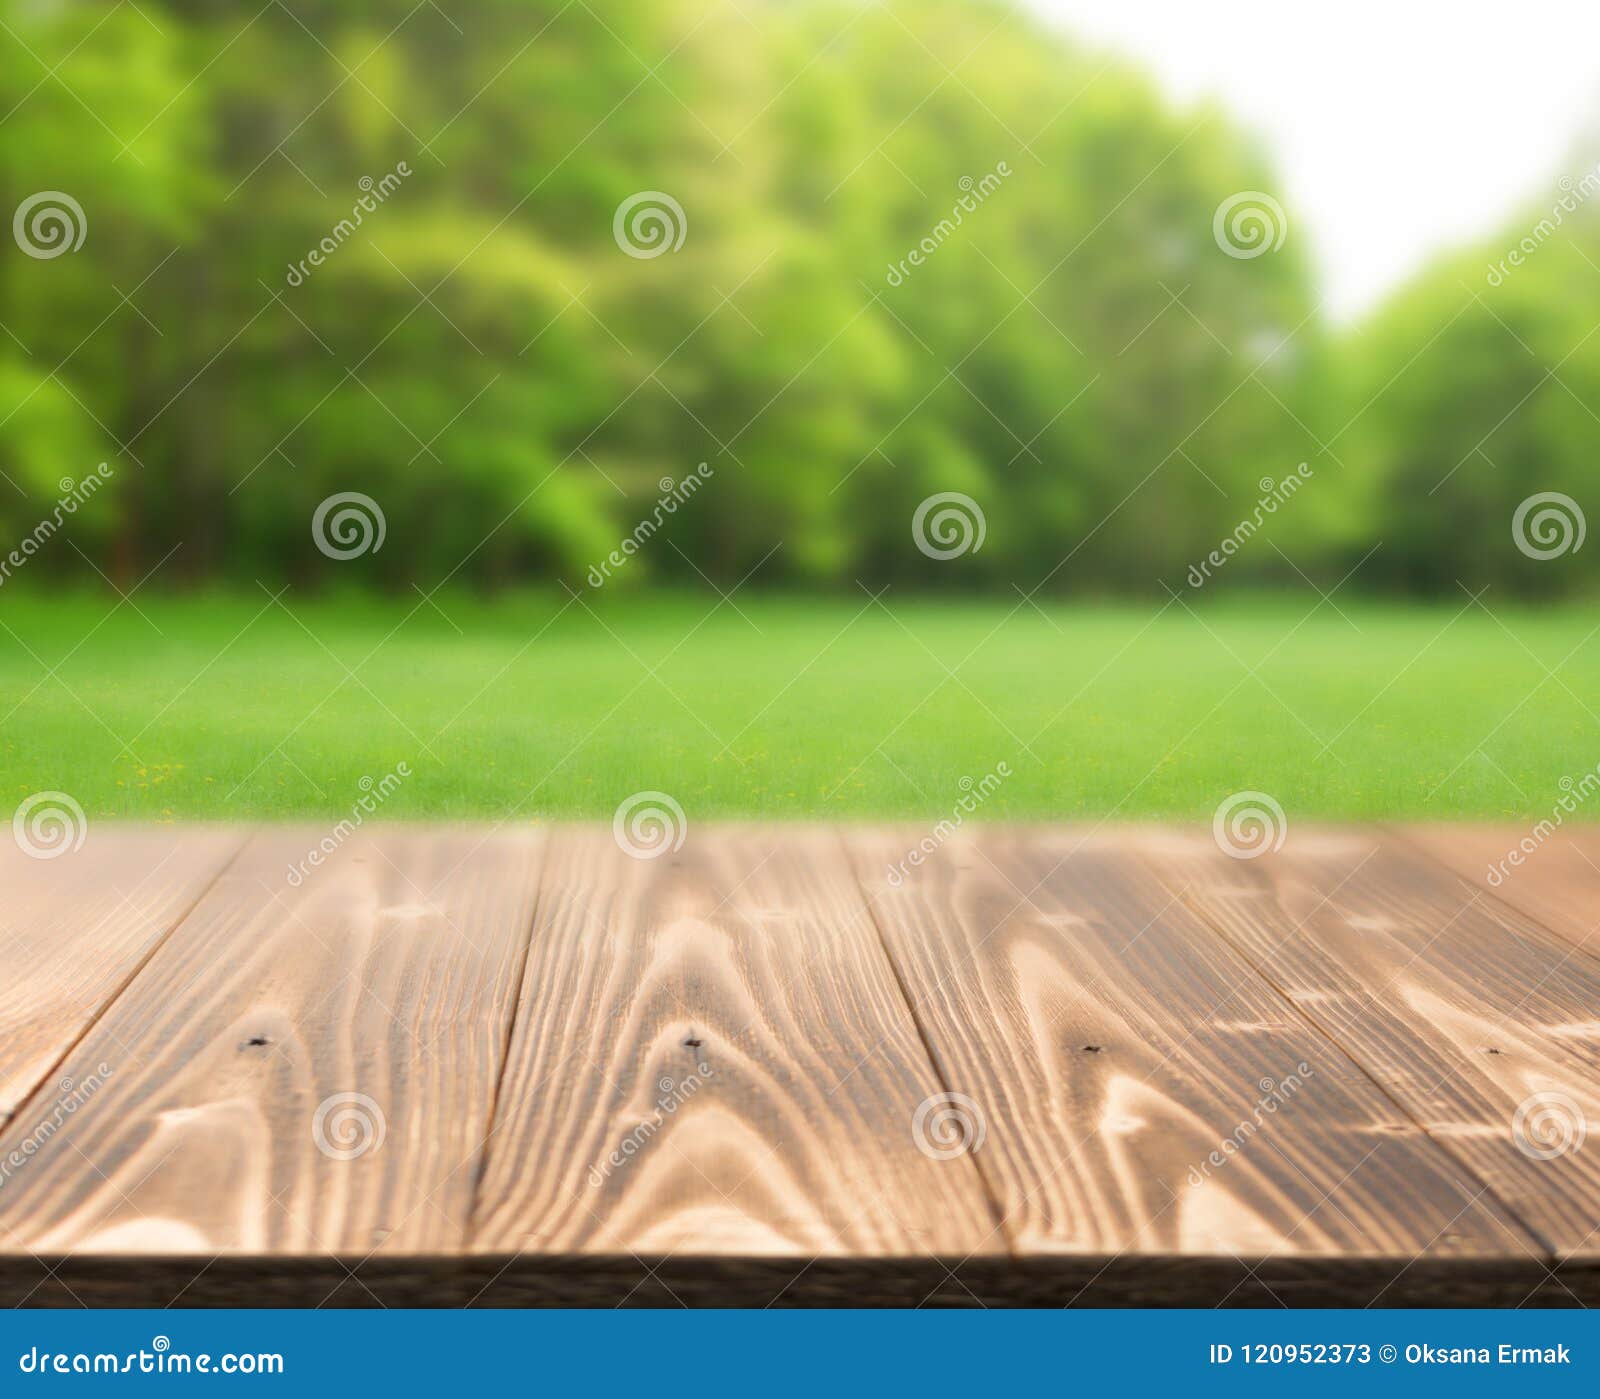 Table Background Outside stock image. Image of counter ...